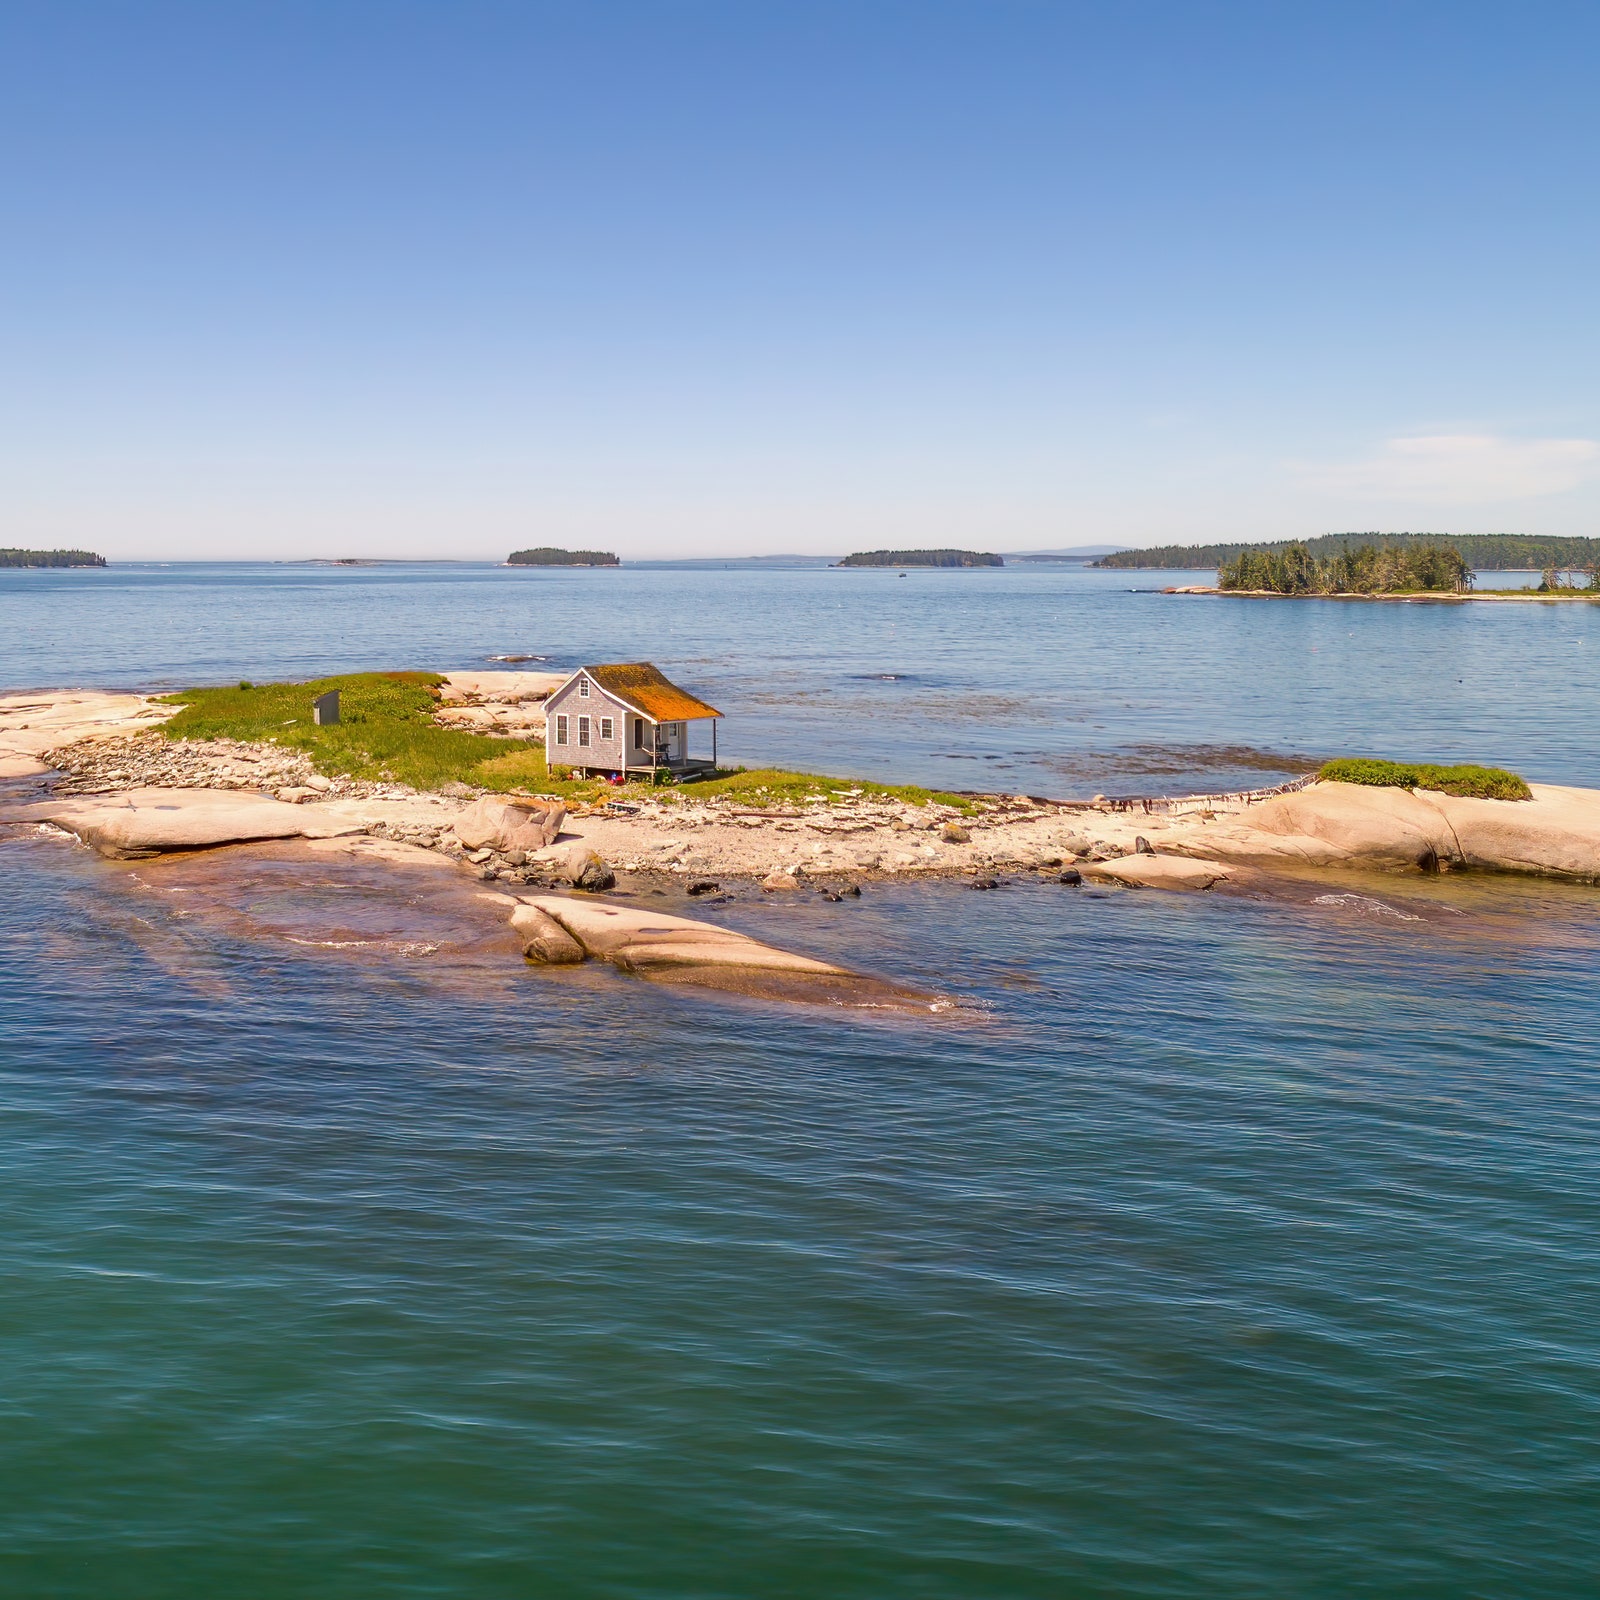 A Private Island Off the Coast of Maine Is Listed for $339,000&-But There’s a Catch